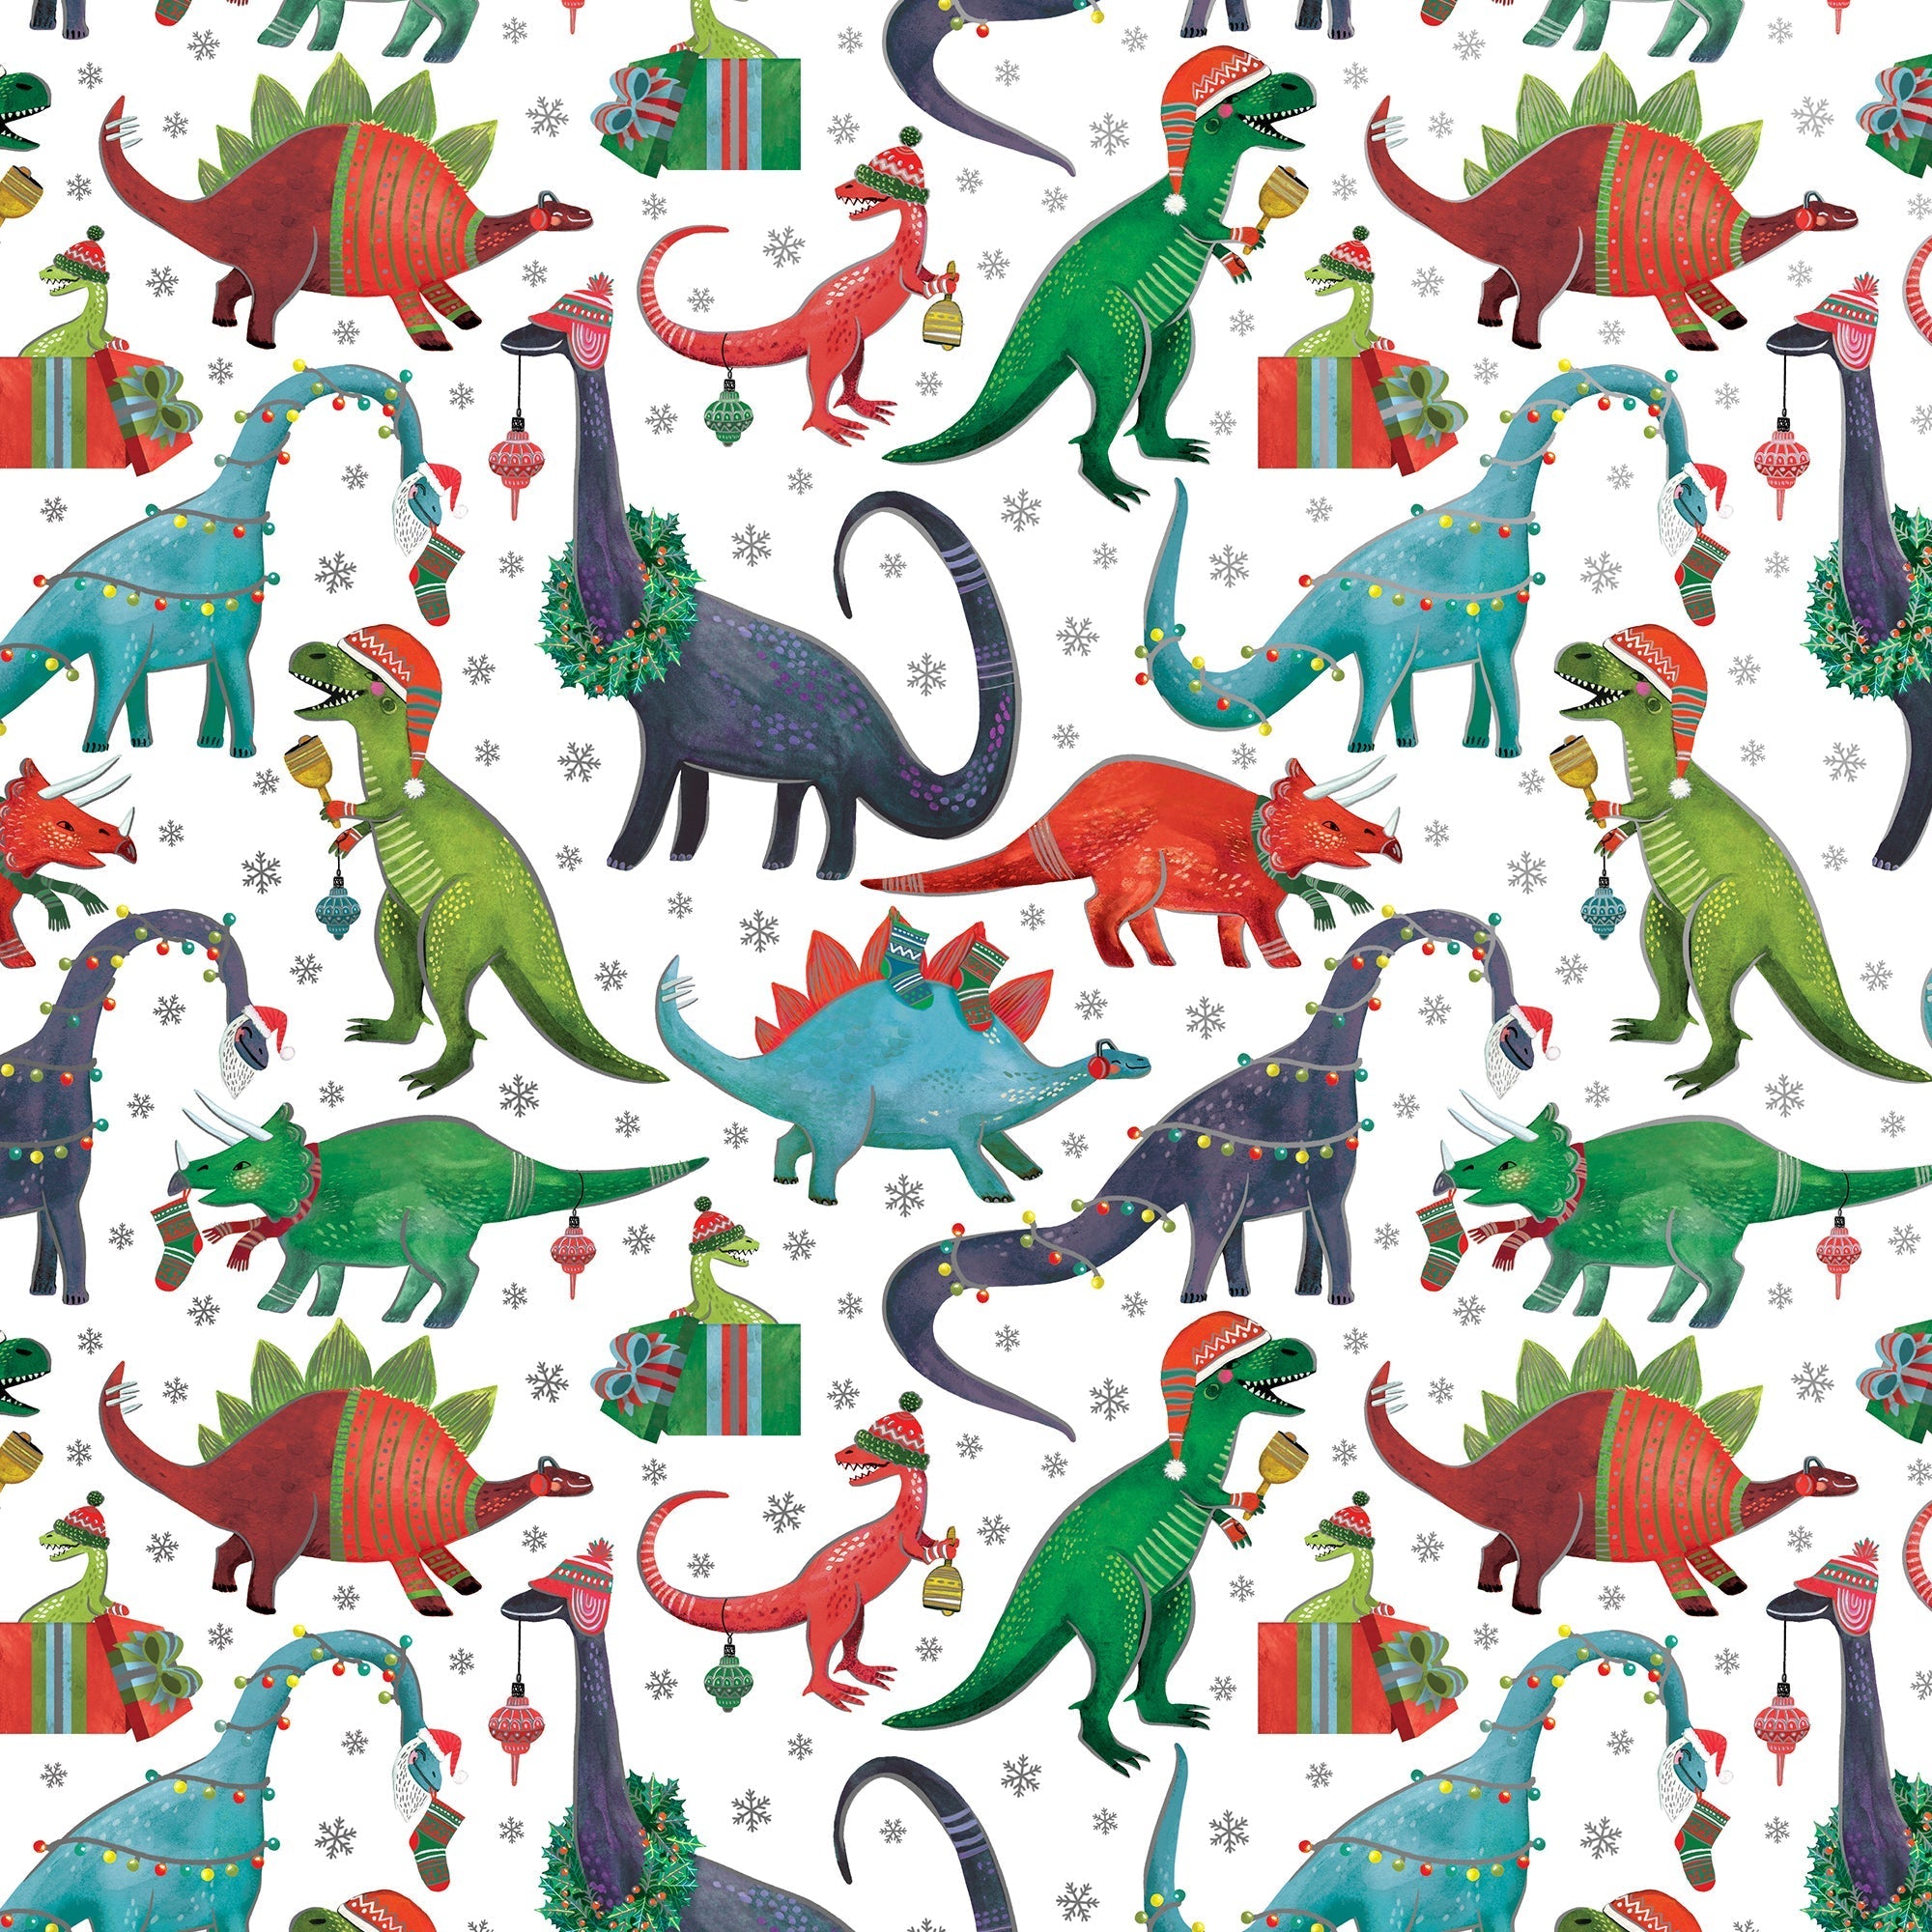 Decked Out Dinosaur Christmas Gift Wrap